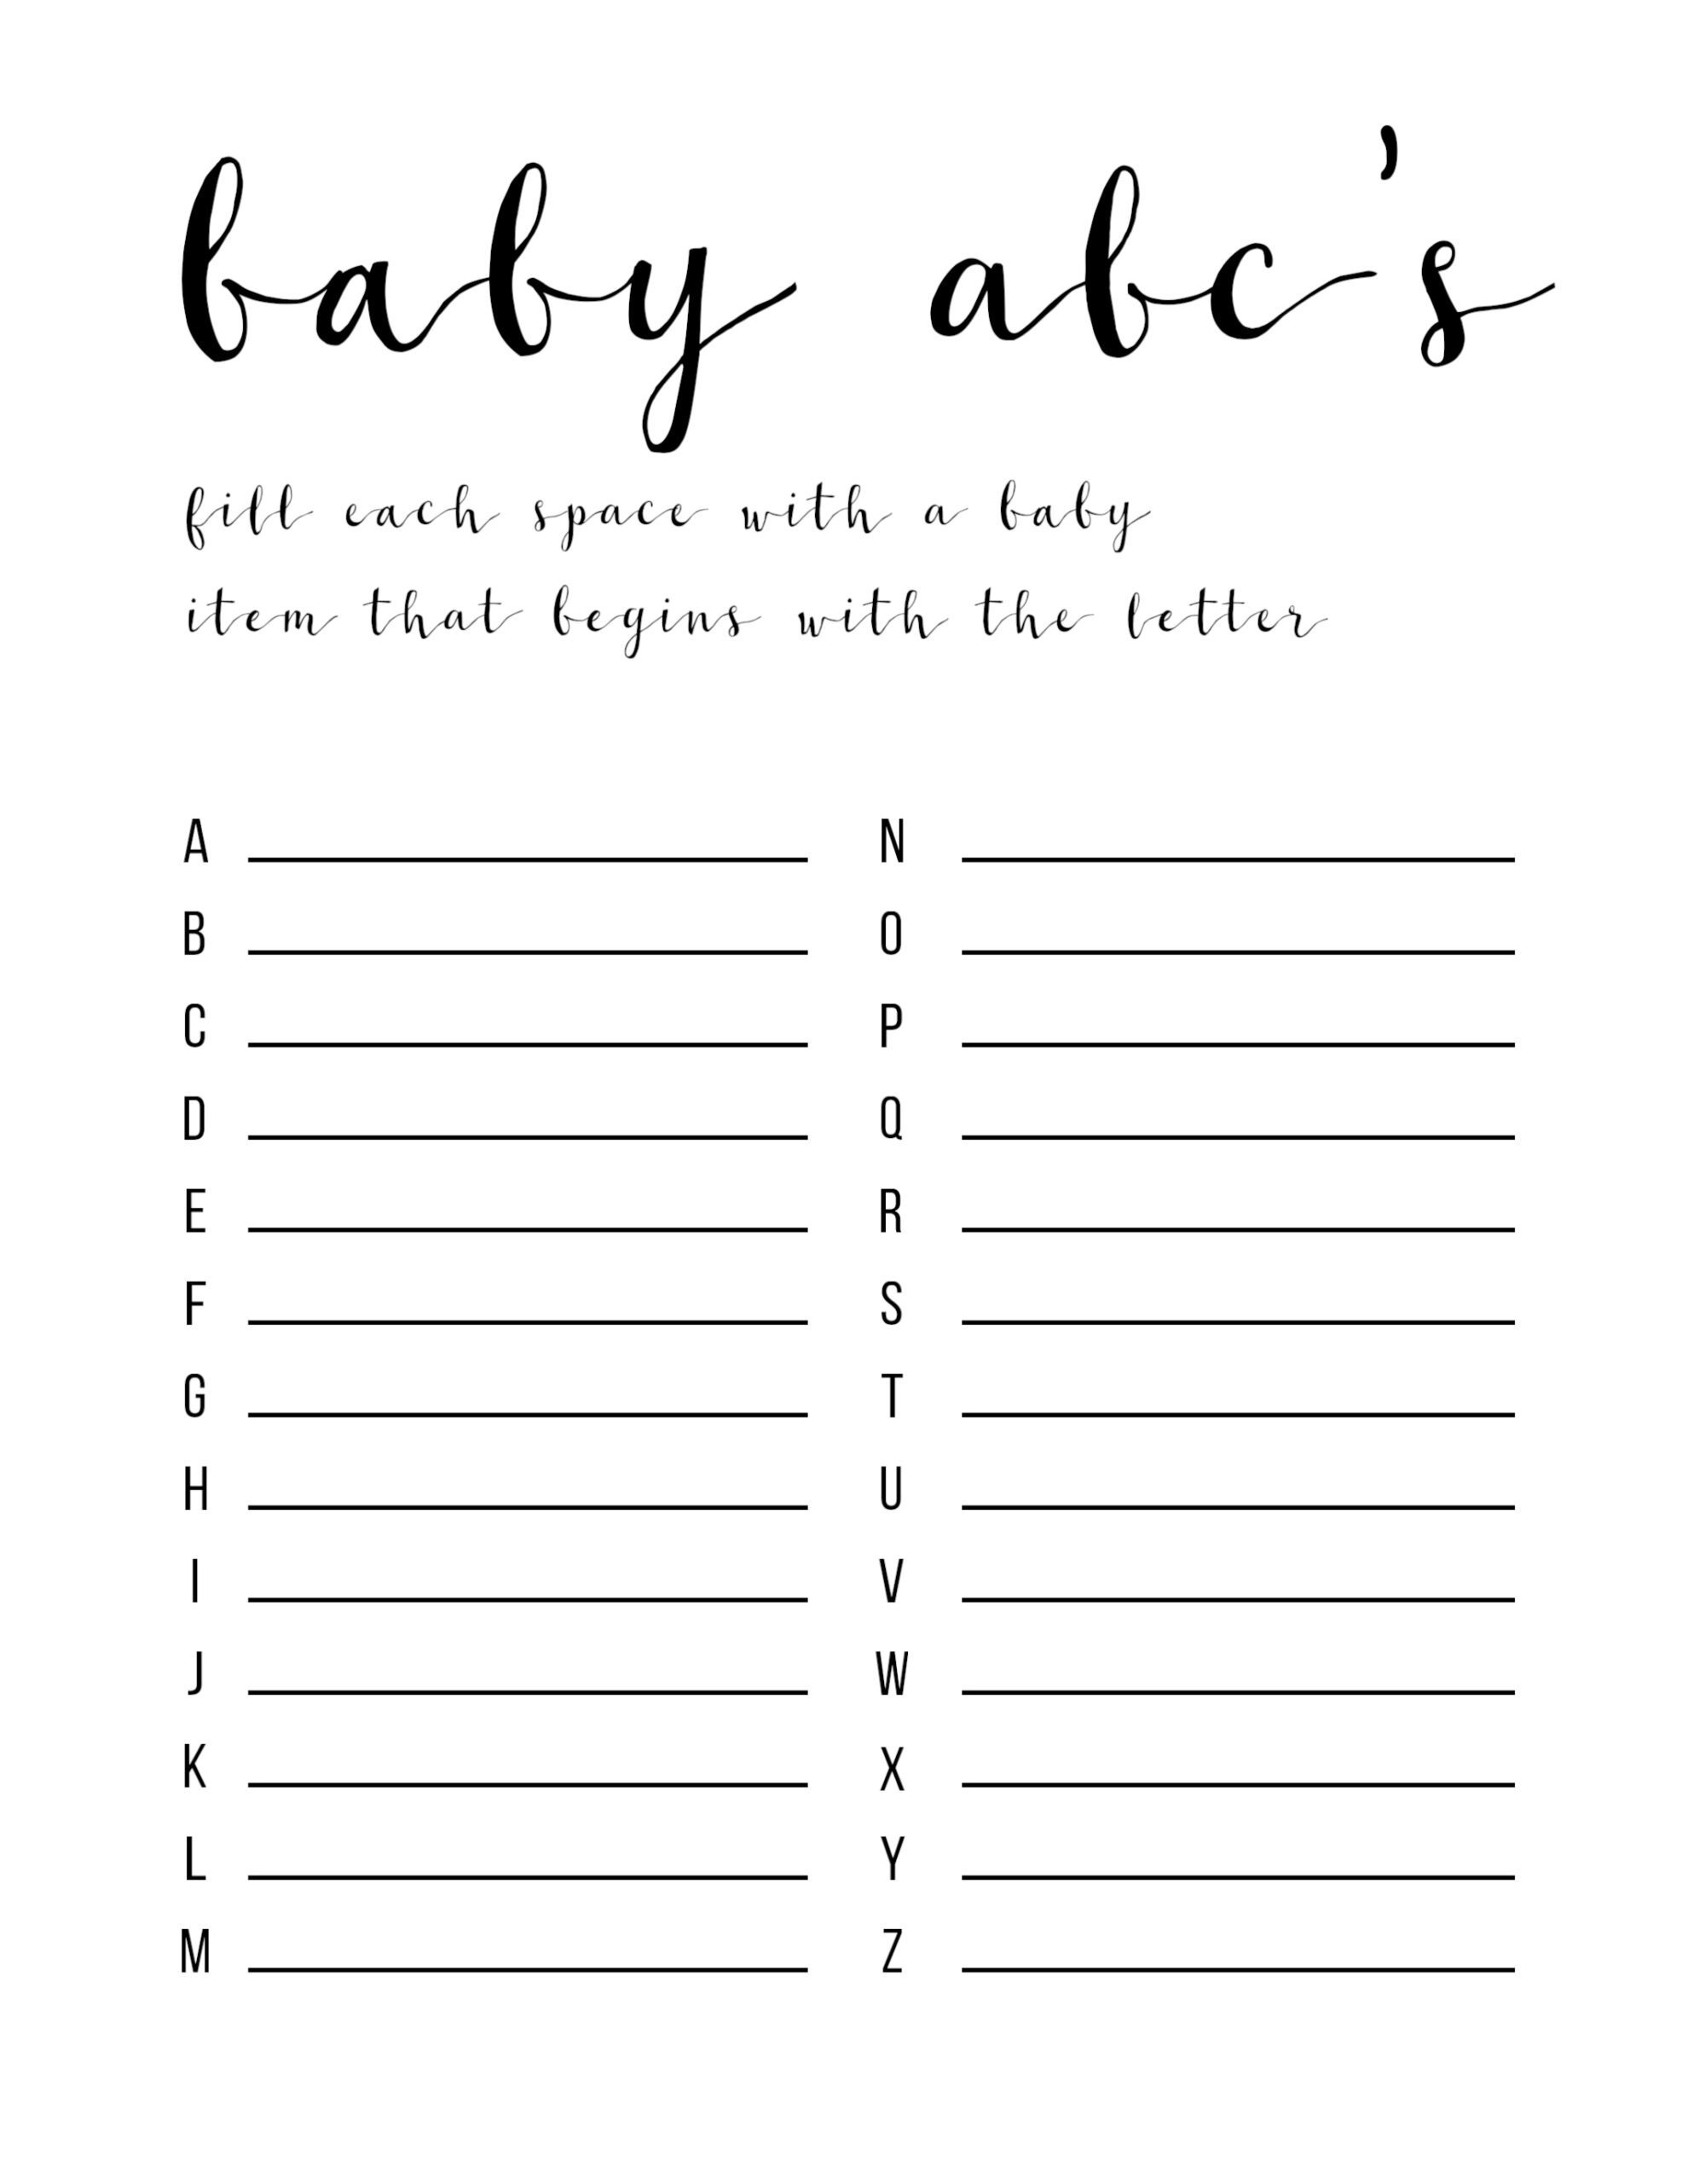 Baby Shower Games Ideas {Abc Game Free Printable} - Paper Trail Design - Emoji Baby Shower Game Free Printable